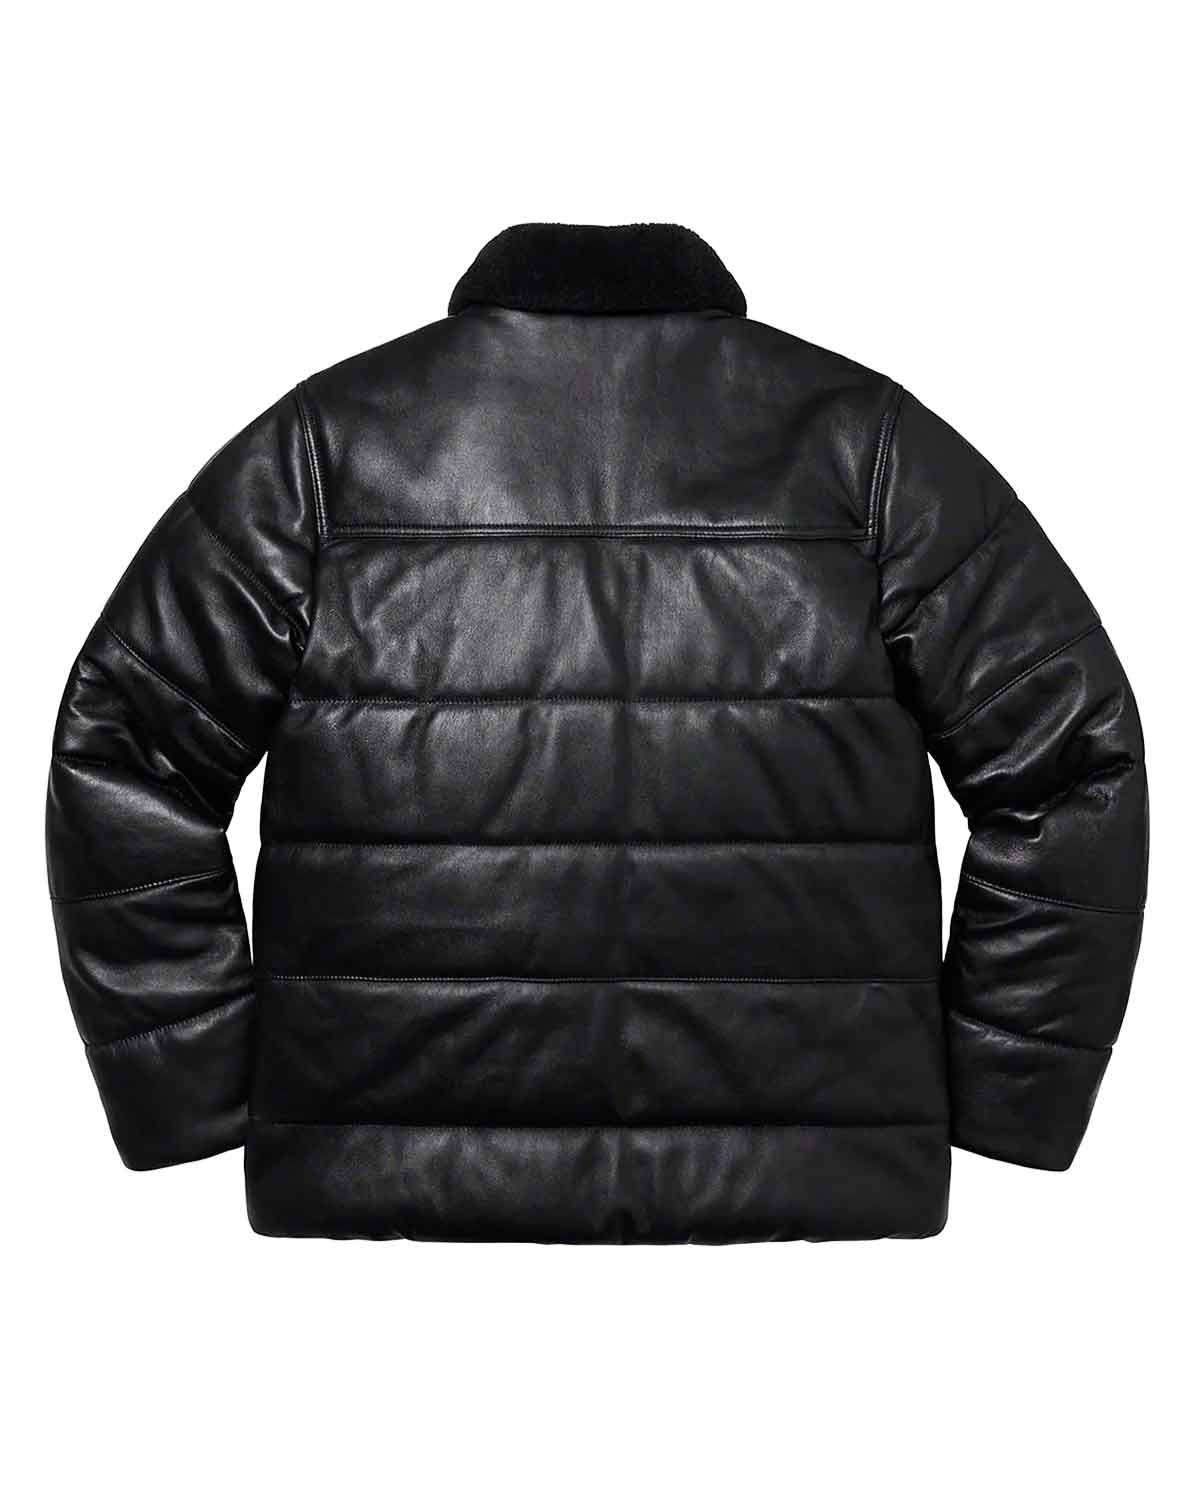 Puffer Leather Jacket With Fur Collar | Elite Jacket